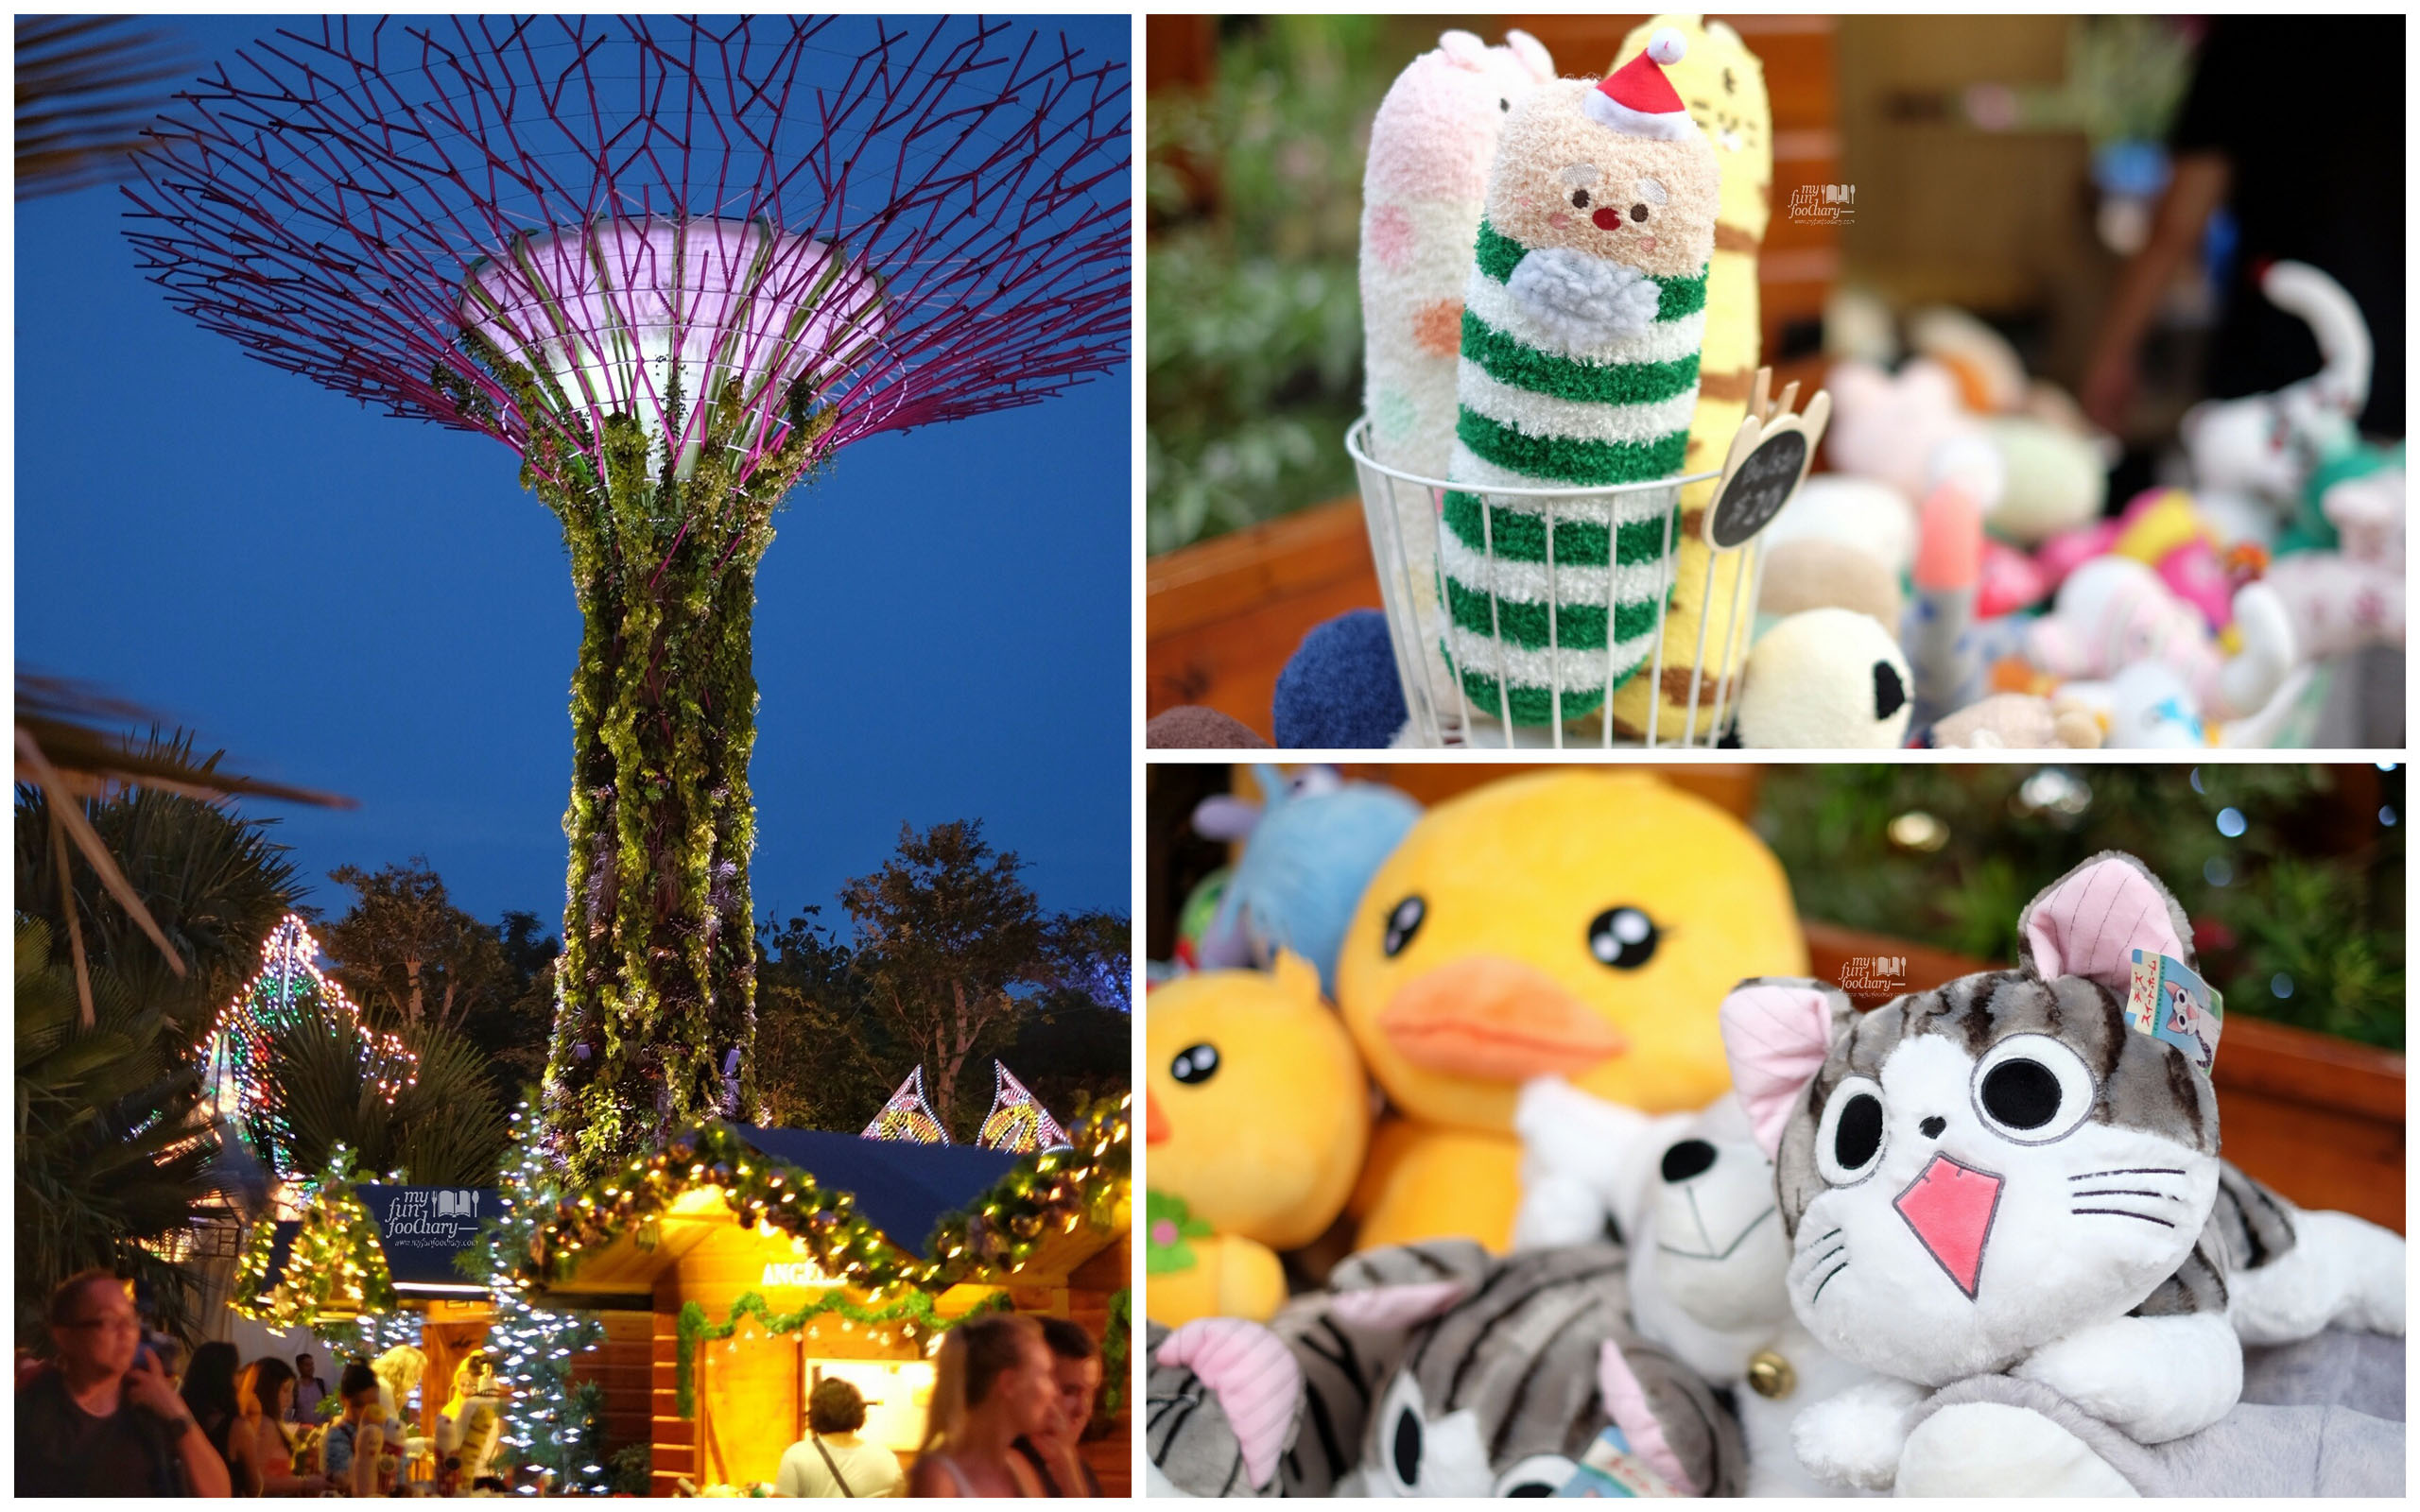 Cute Stuff at The Festive Markets Christmas Wonderland at Gardens By The Bay by Myfunfoodiary